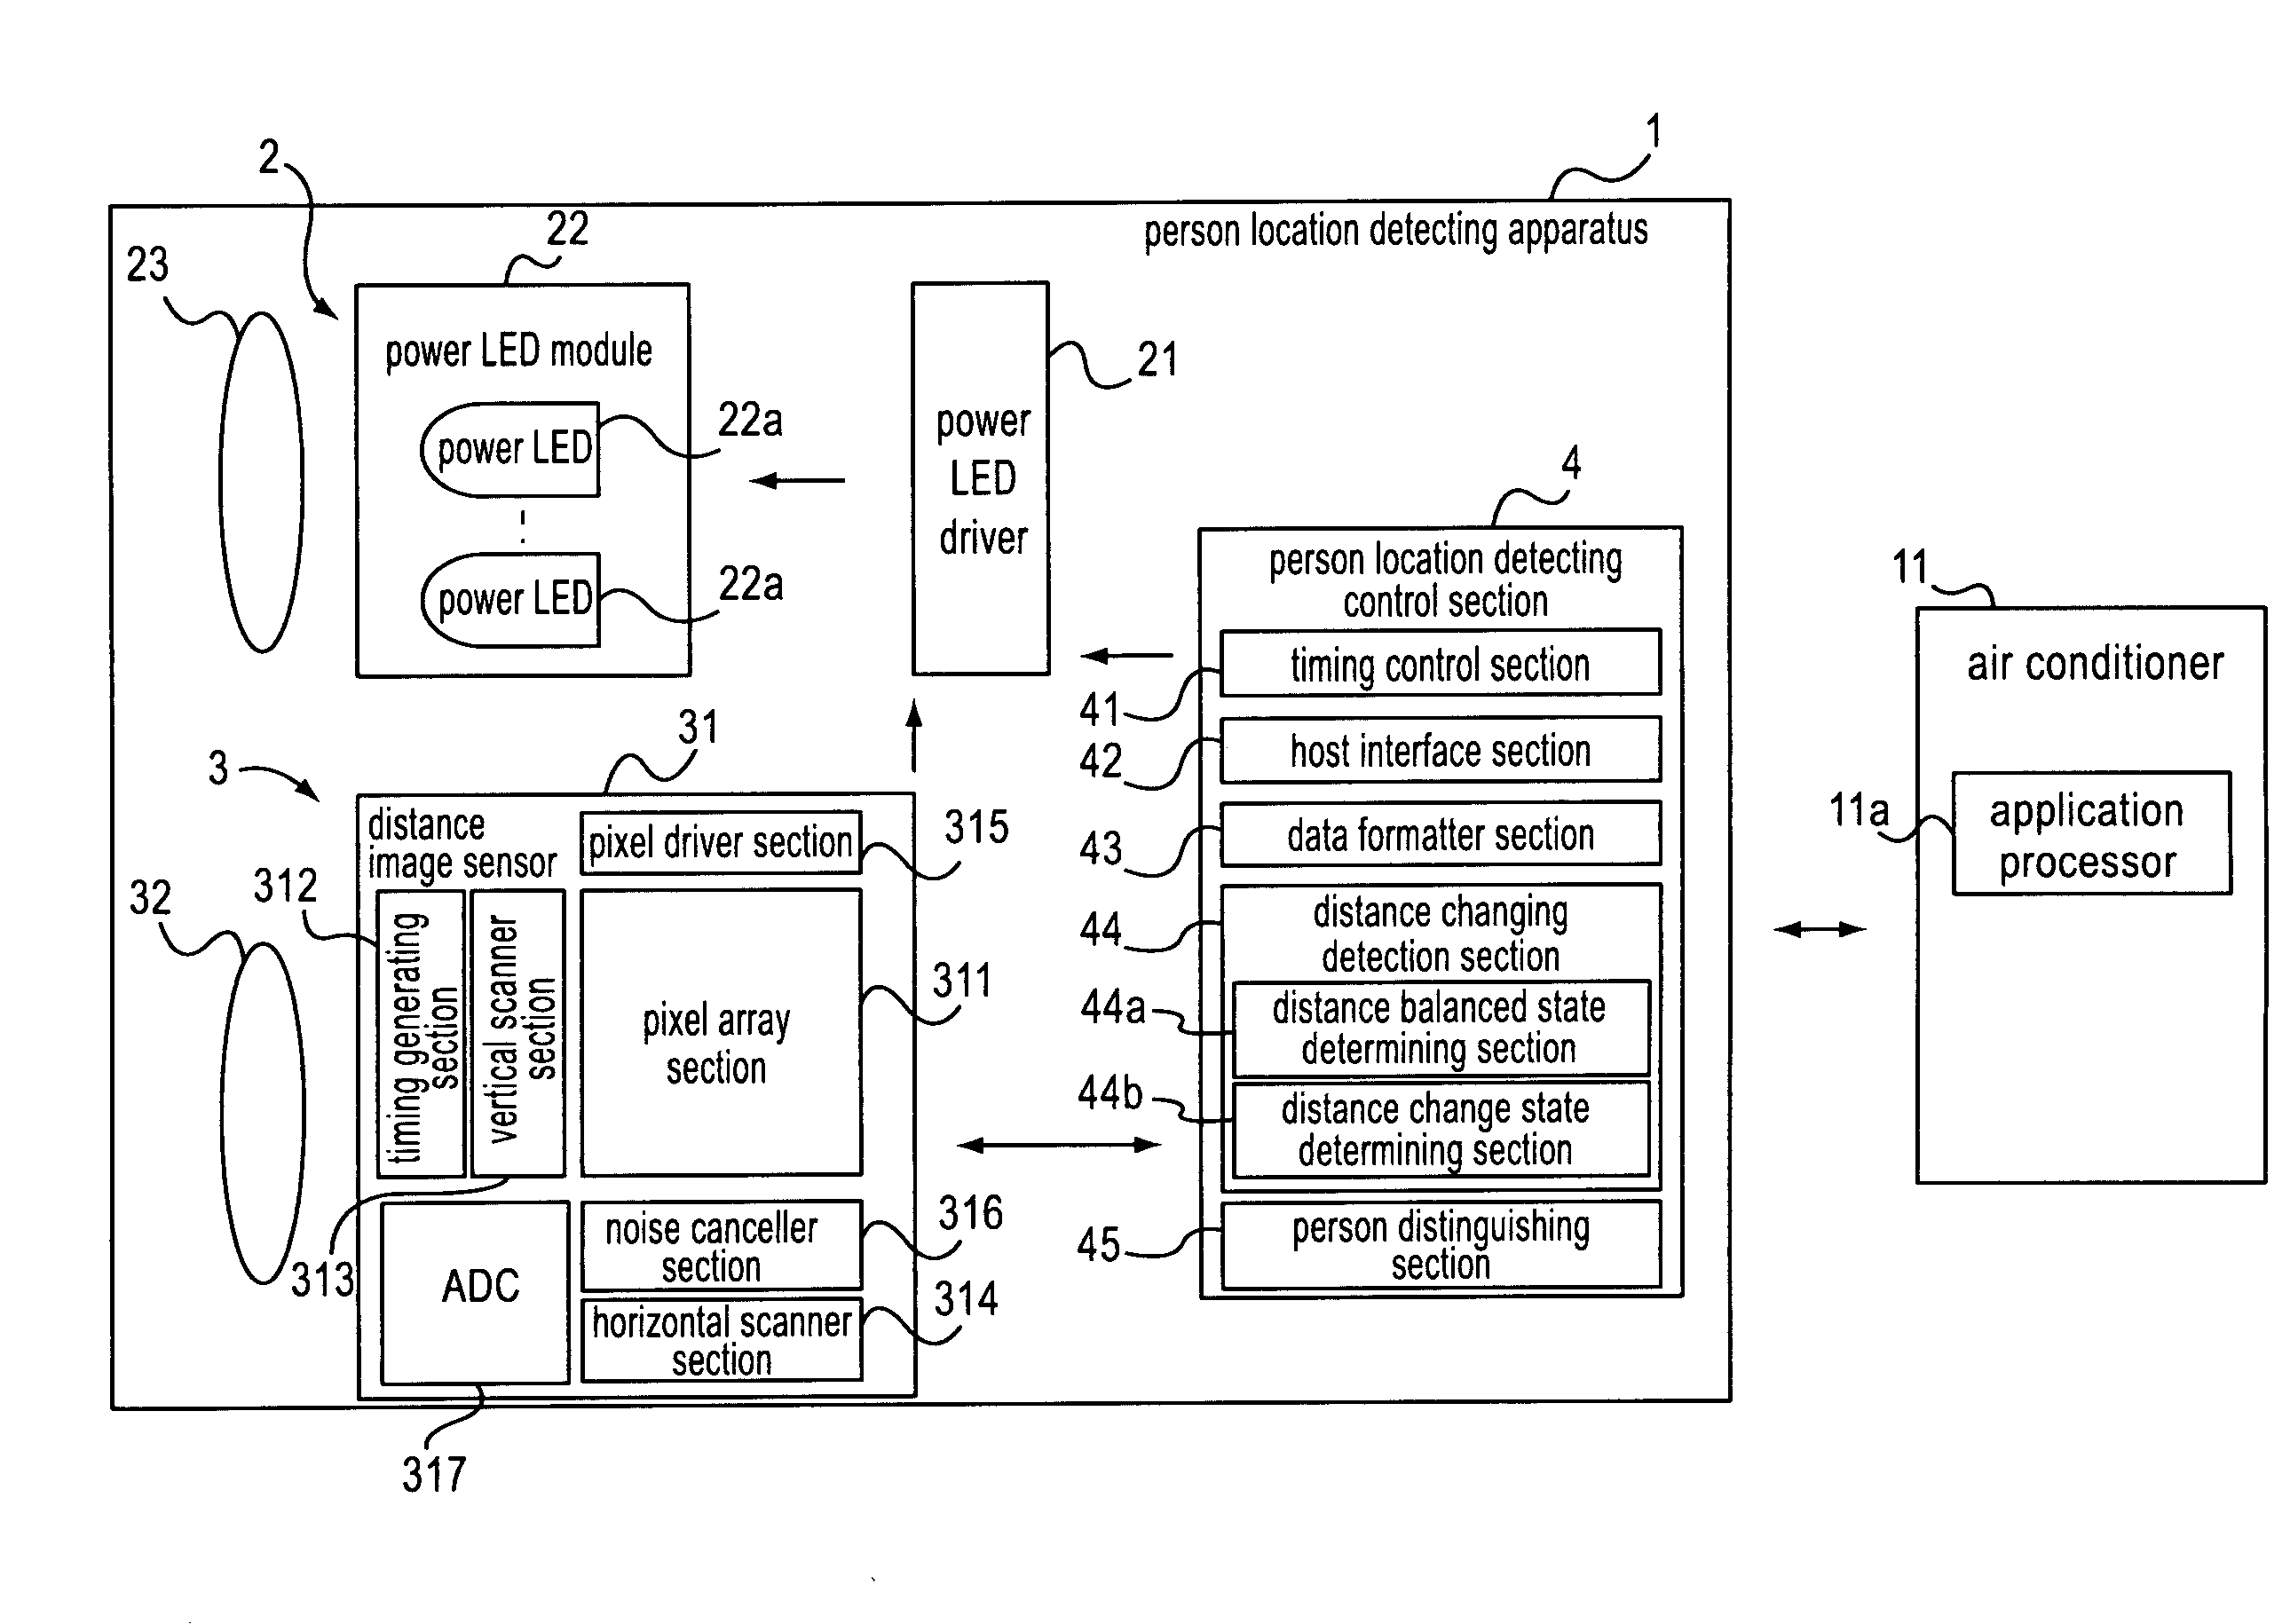 Person location detection apparatus and air conditioner